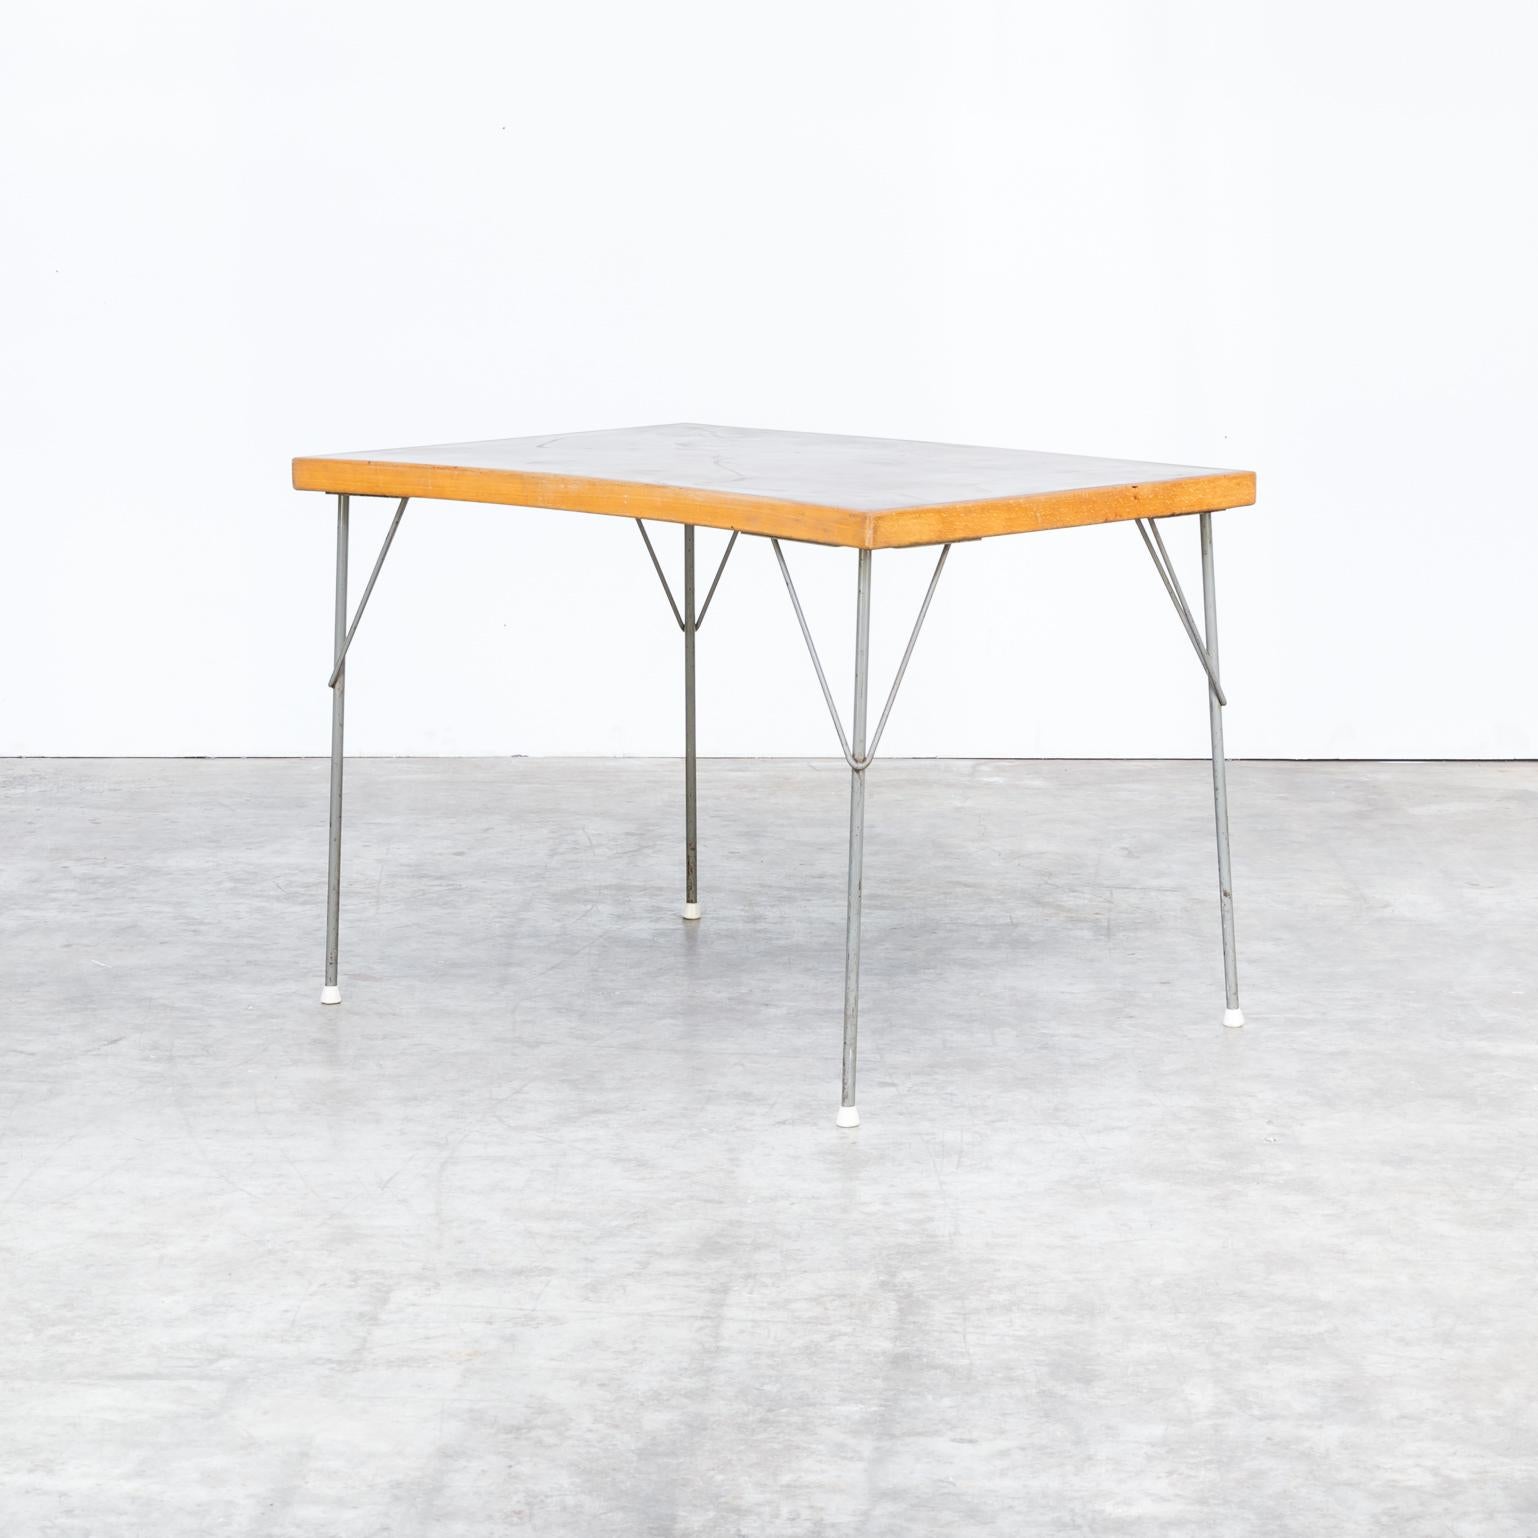 1950s Wim Rietveld Model 530 Dining Table for Gispen In Good Condition For Sale In Amstelveen, Noord